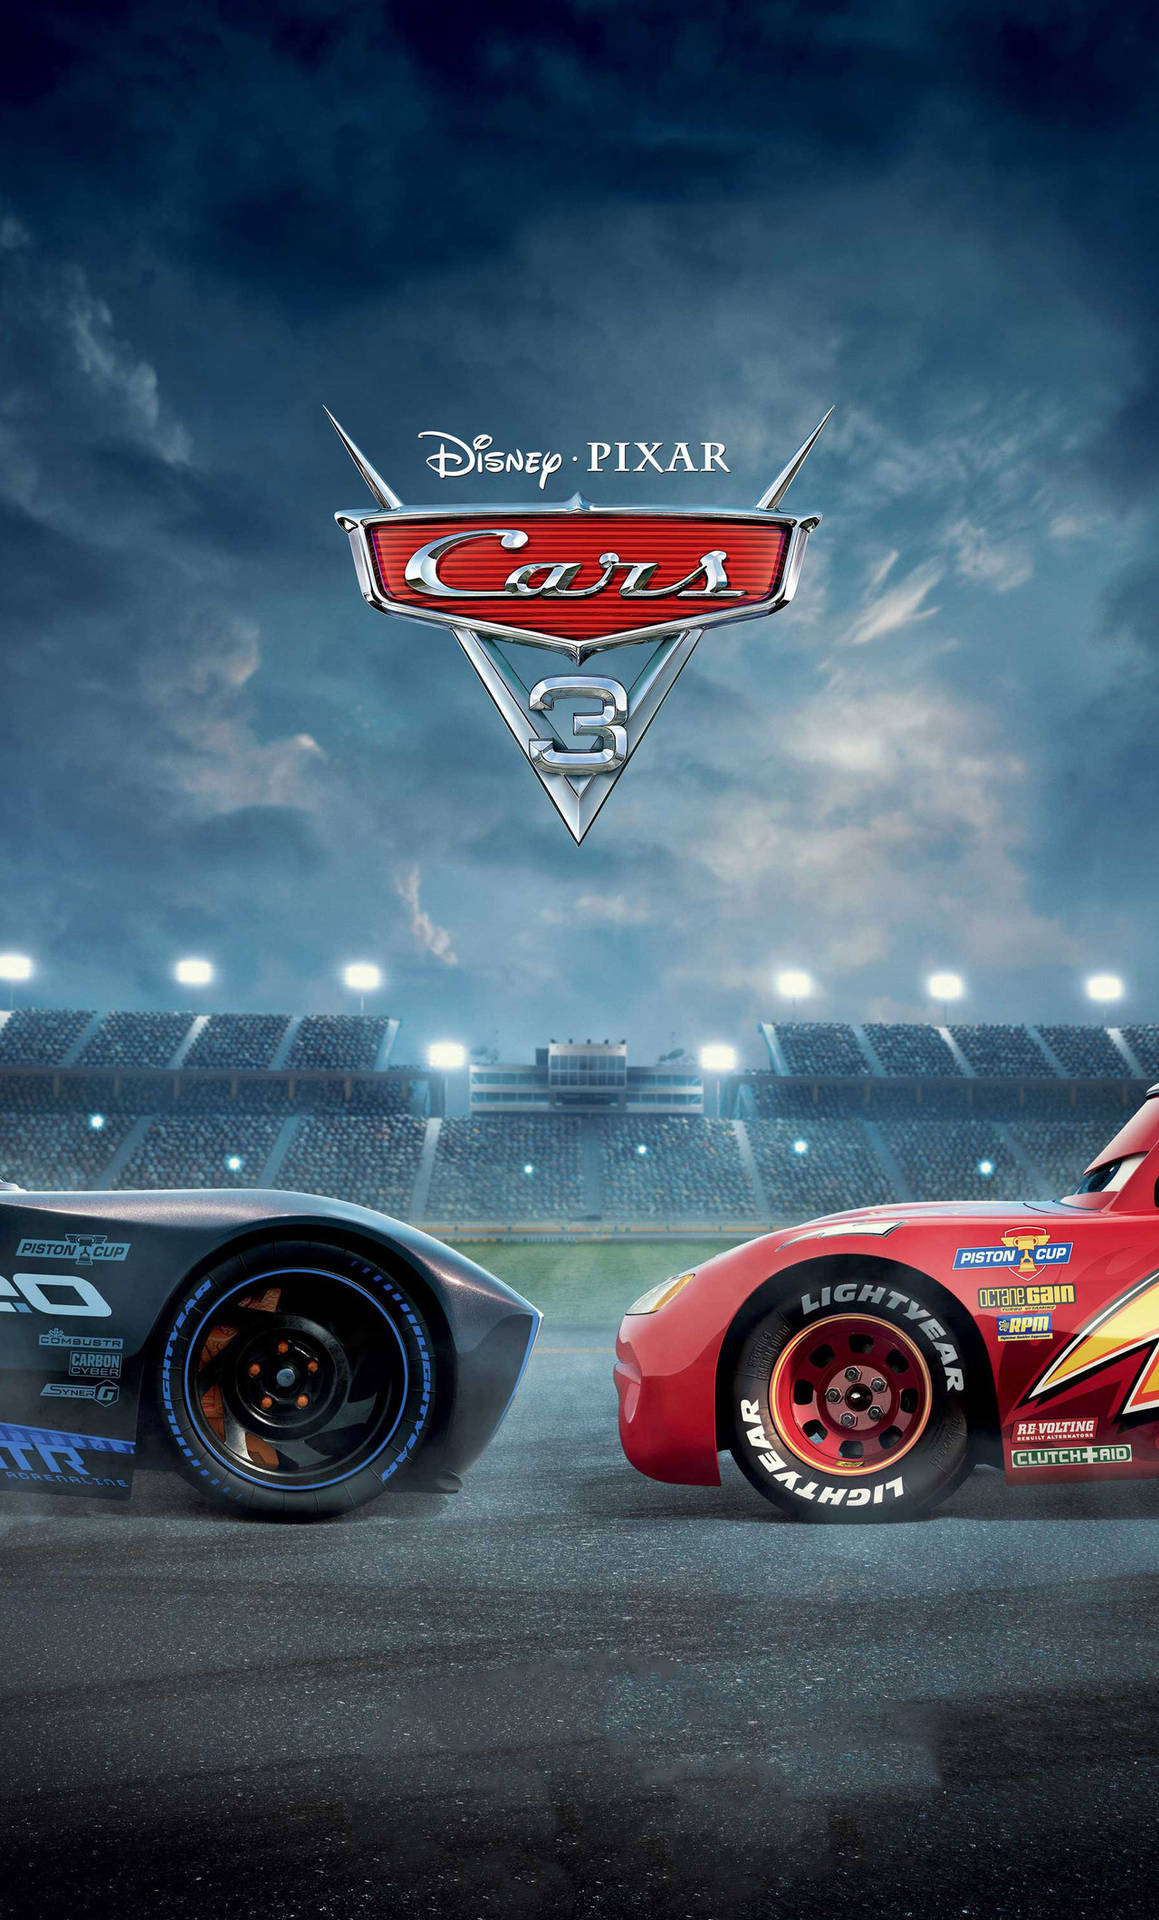 Wallpaper Disney Cars Movie Scene on a Sunny Day Background  Download  Free Image